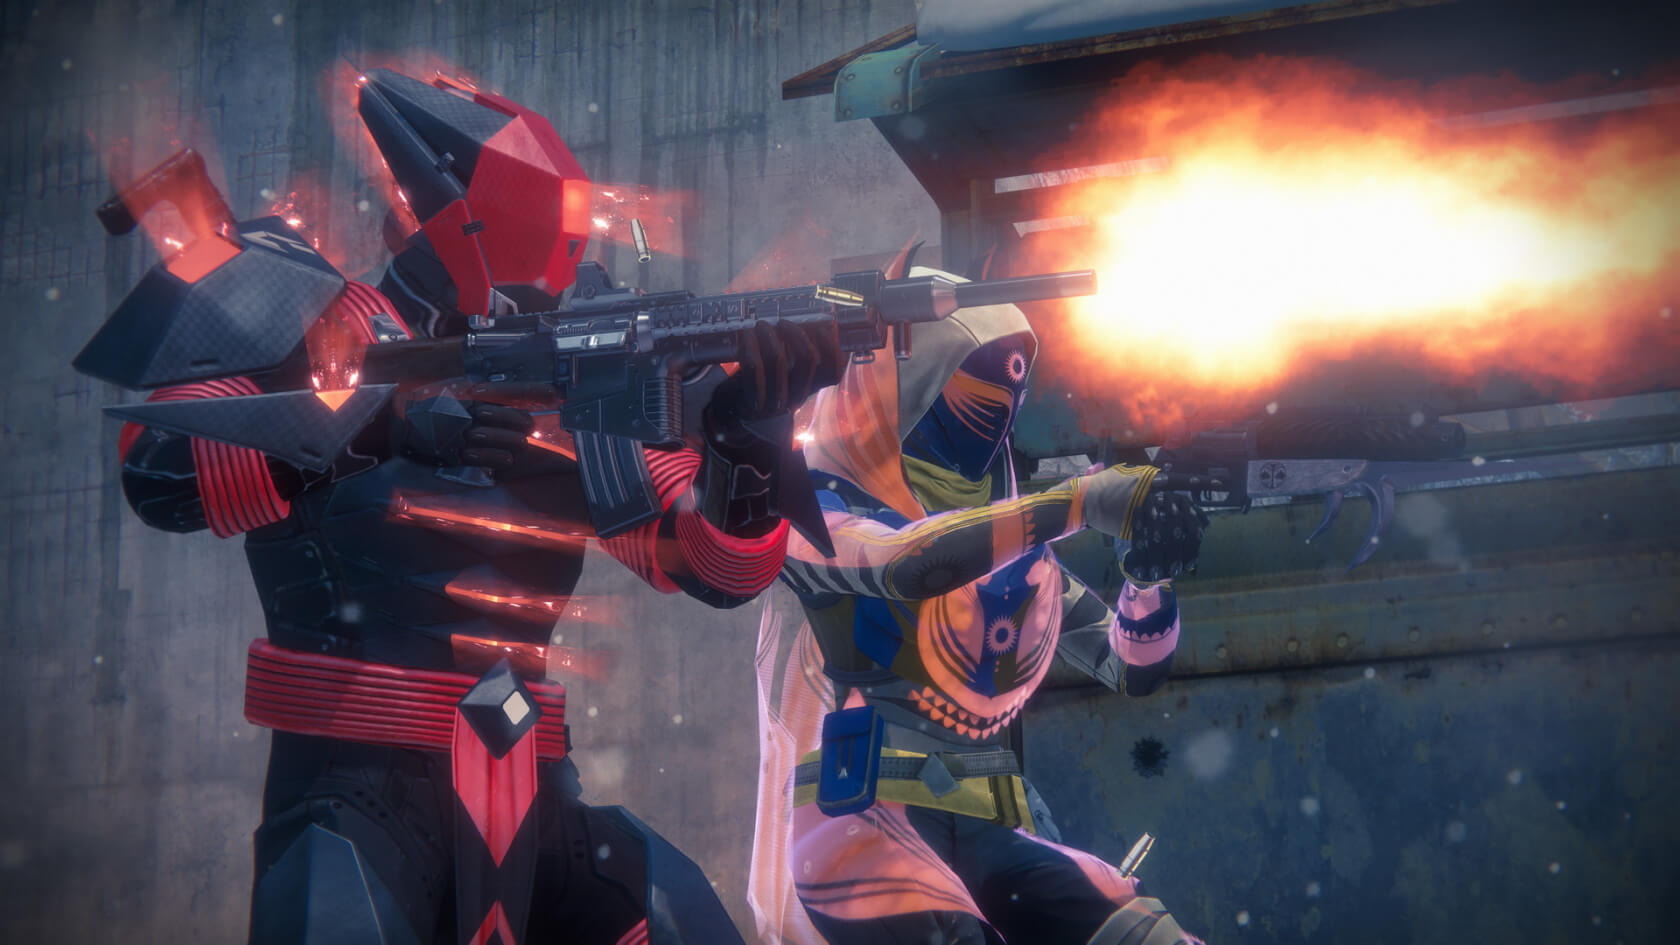 Destiny 2 players outraged at Bungie's lack of transparency regarding level rewards